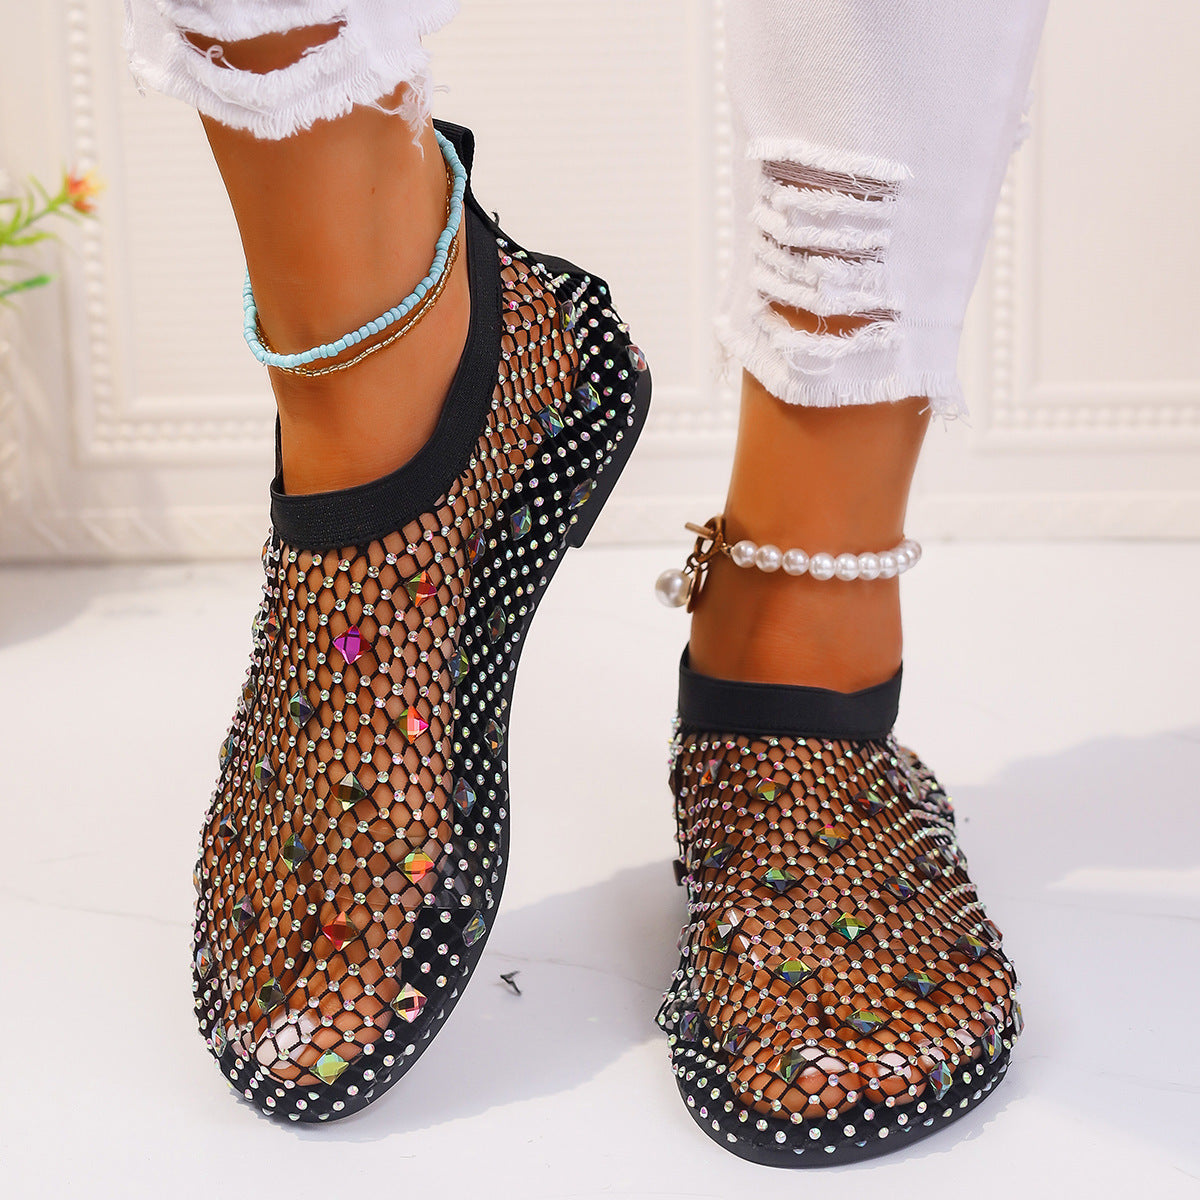 Fashion Mesh Flat Sandals With Colorful Rhinestone Design Round Toe Beach Shoes